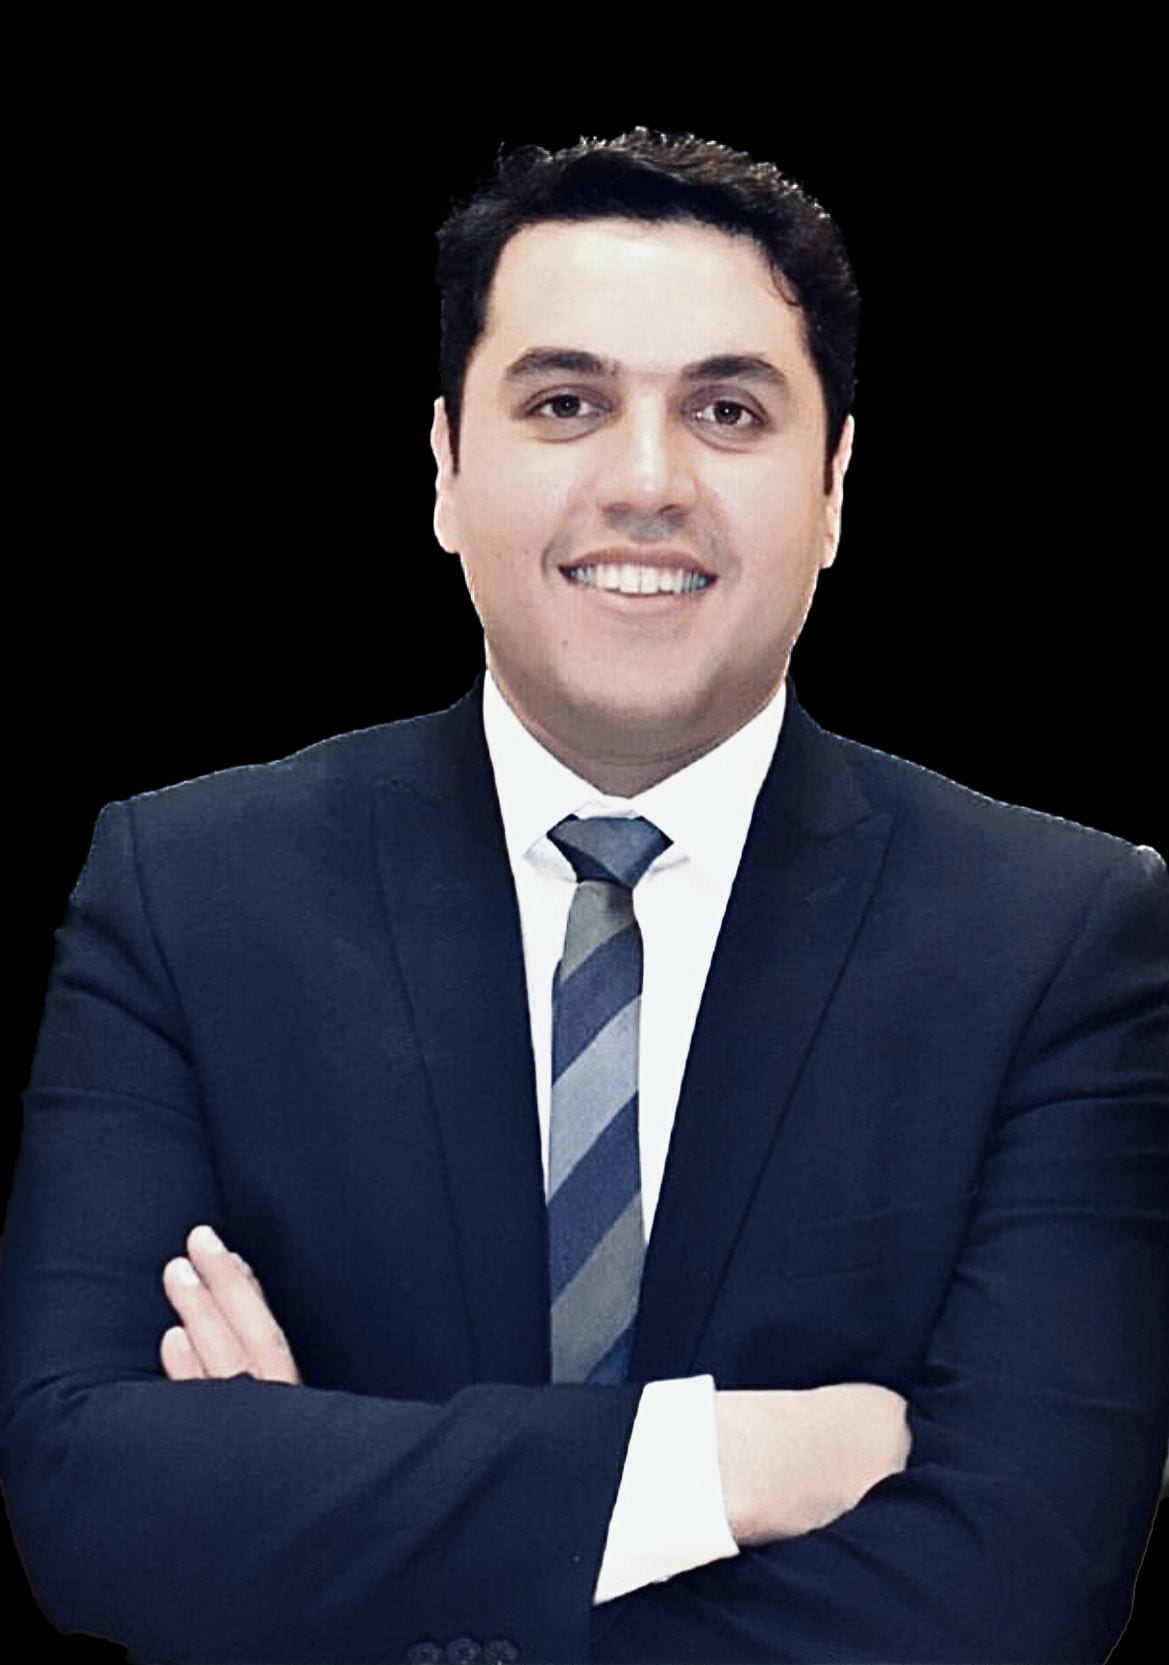 A picture of Haroon in a suit and tie, smiling at the camera